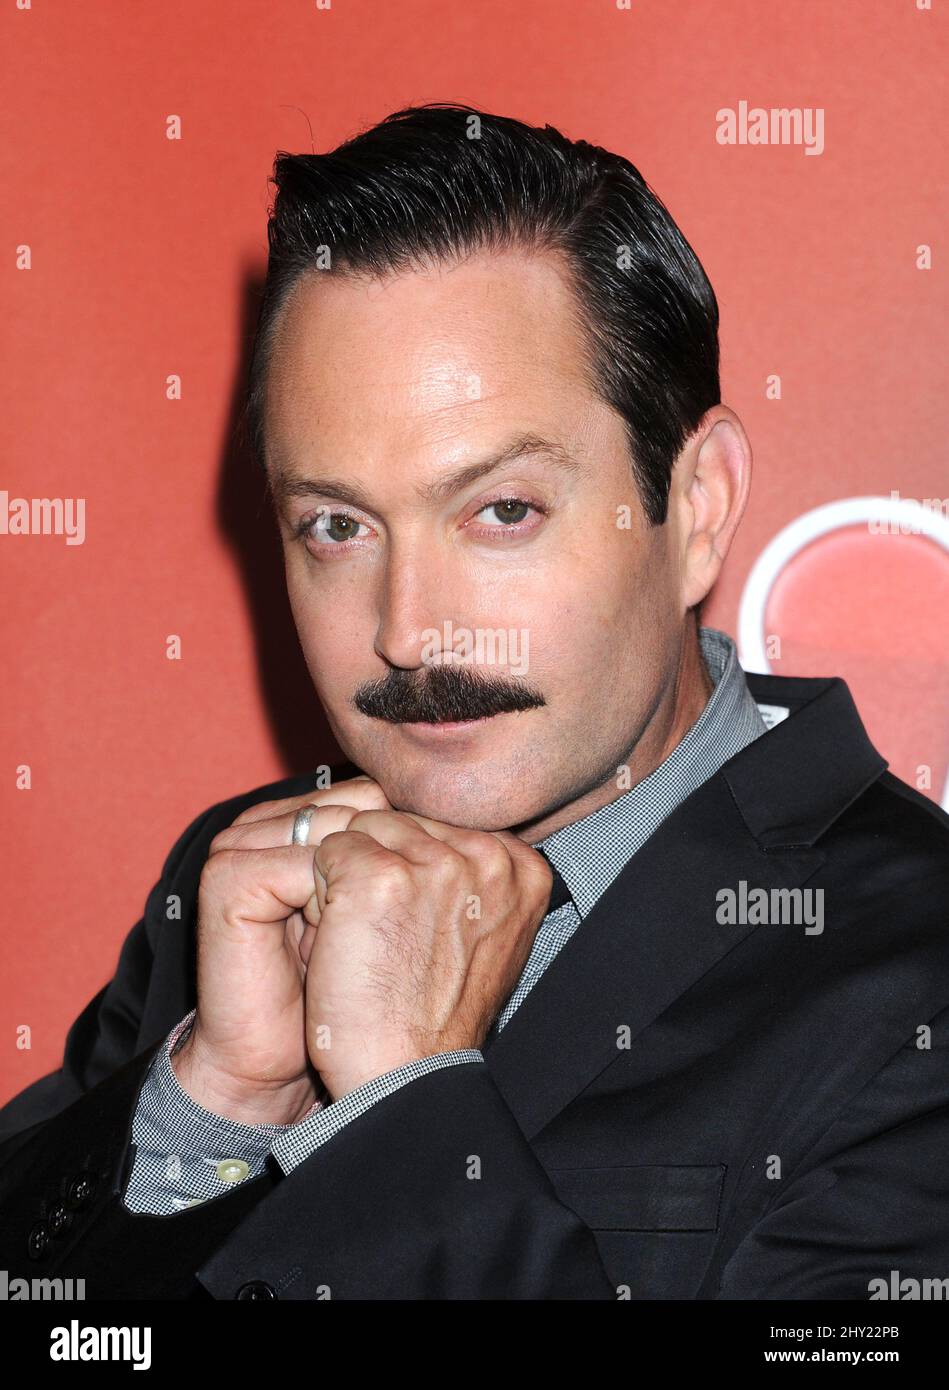 Thomas Lennon attending the NBCUniversal Summer 2013 TCA Press Tour in Los Angeles, California. Stock Photo